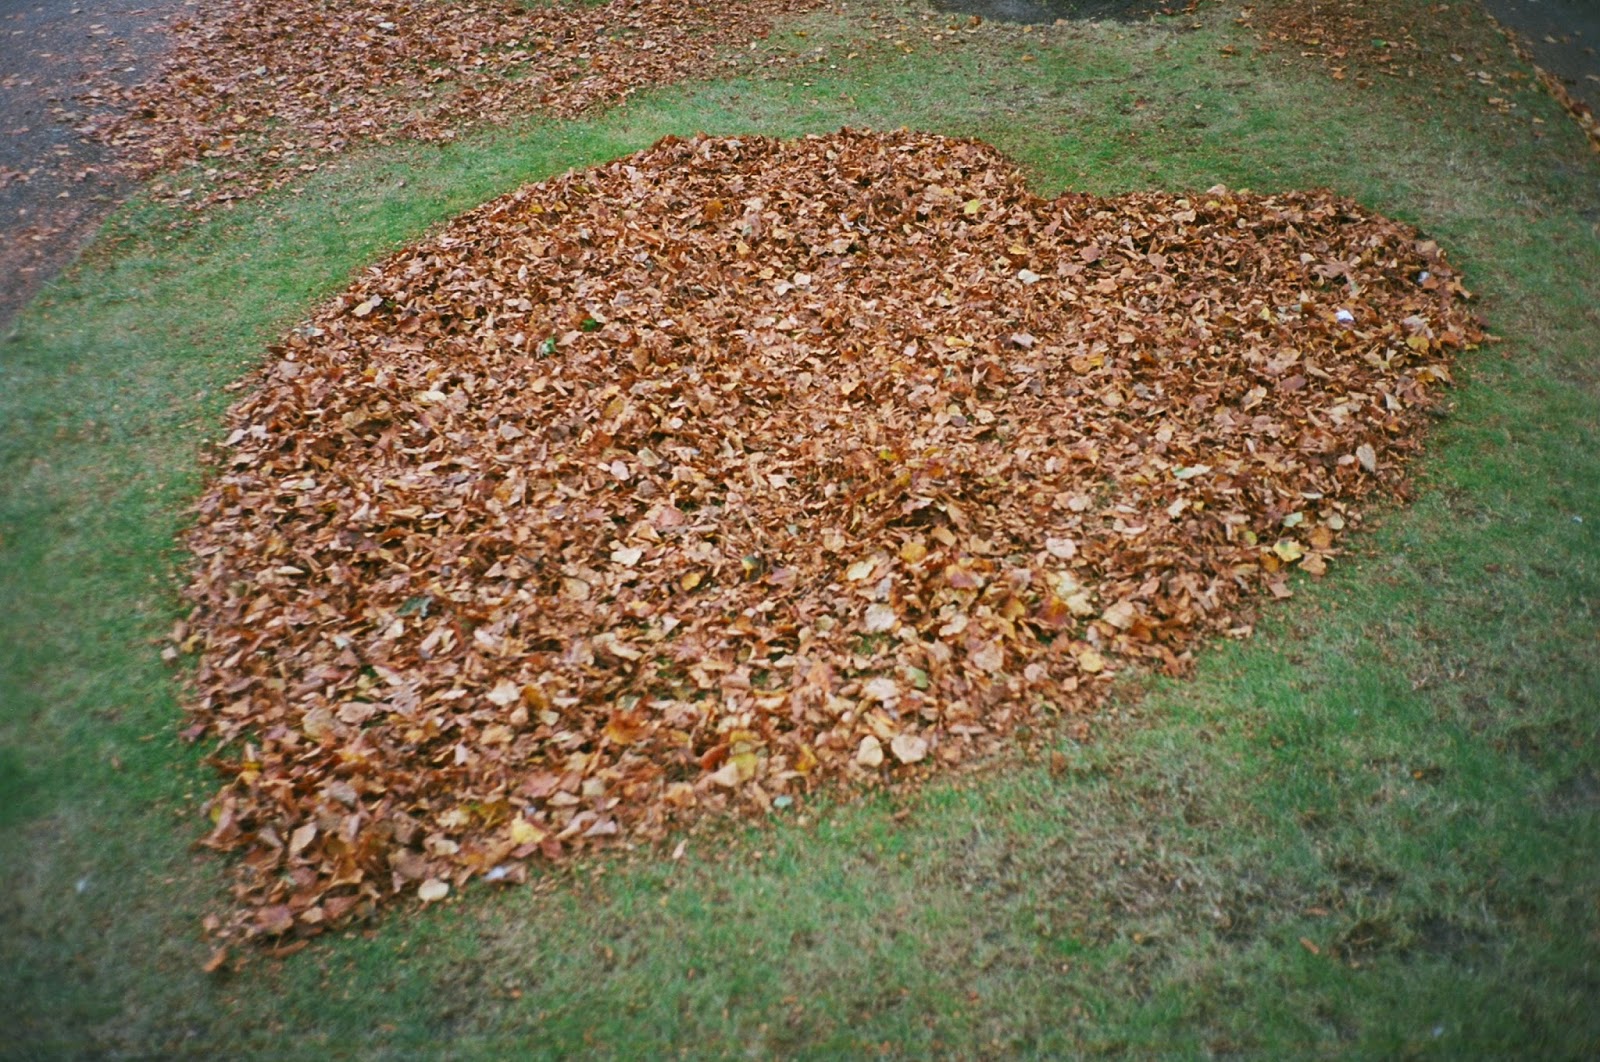 LOVE, SYMBOLS OF LOVE, SCULPTURE IN THE PARK, SITE SPECIFIC ART INSTALLATION, OUTSIDER ART, AUTUMN LEAVES, © VAC 100 DAYS 4 MILLION CONVERSATIONS